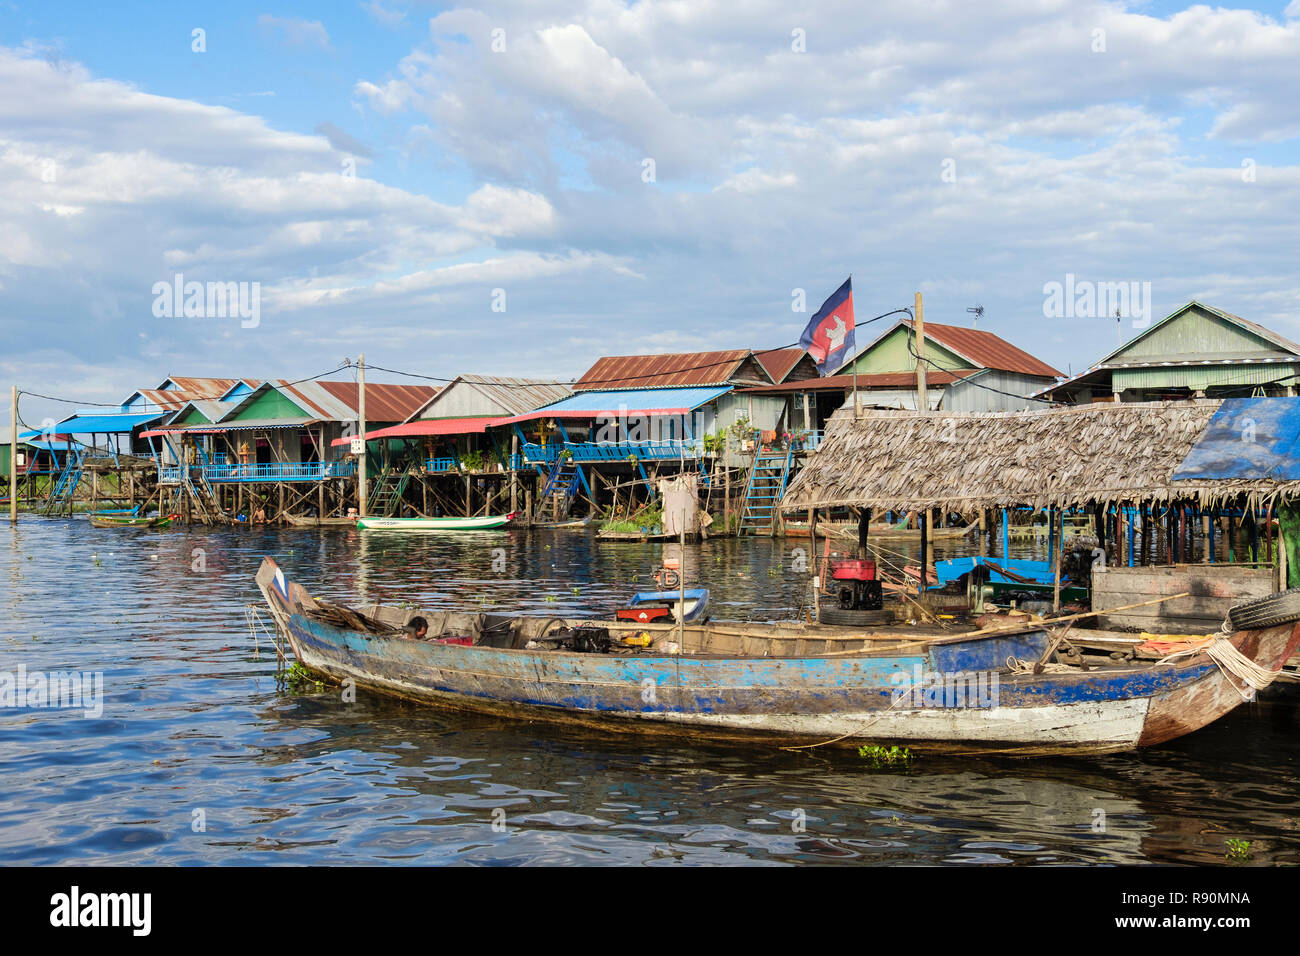 Old wooden boat and traditional houses on stilts in floating fishing village in Tonle Sap lake. Kampong Phluk, Siem Reap province, Cambodia, Asia Stock Photo